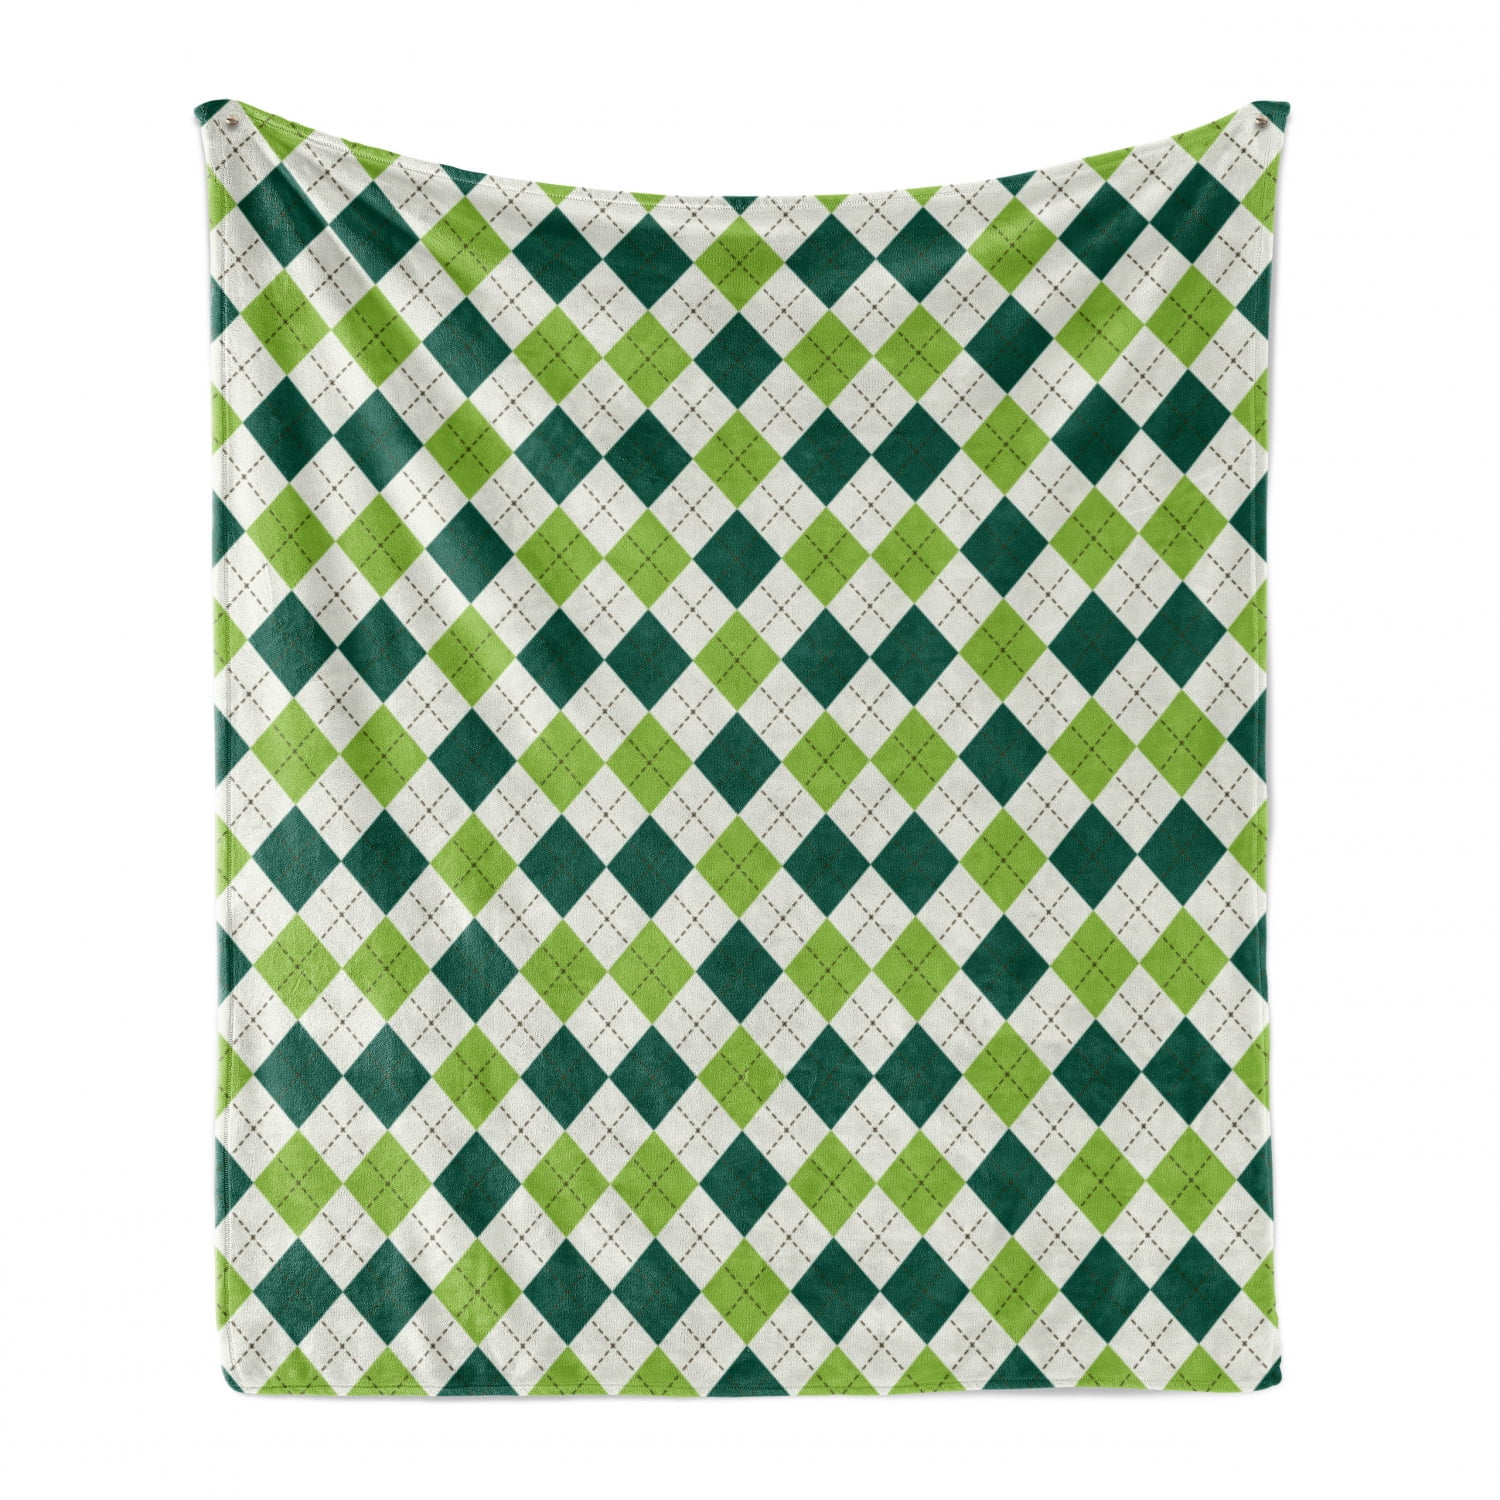 Cozy Plush for Indoor and Outdoor Use Ambesonne Geometric Soft Flannel Fleece Throw Blanket Pale Green Dark Teal Pattern of Circles and Triangles 50 x 60 